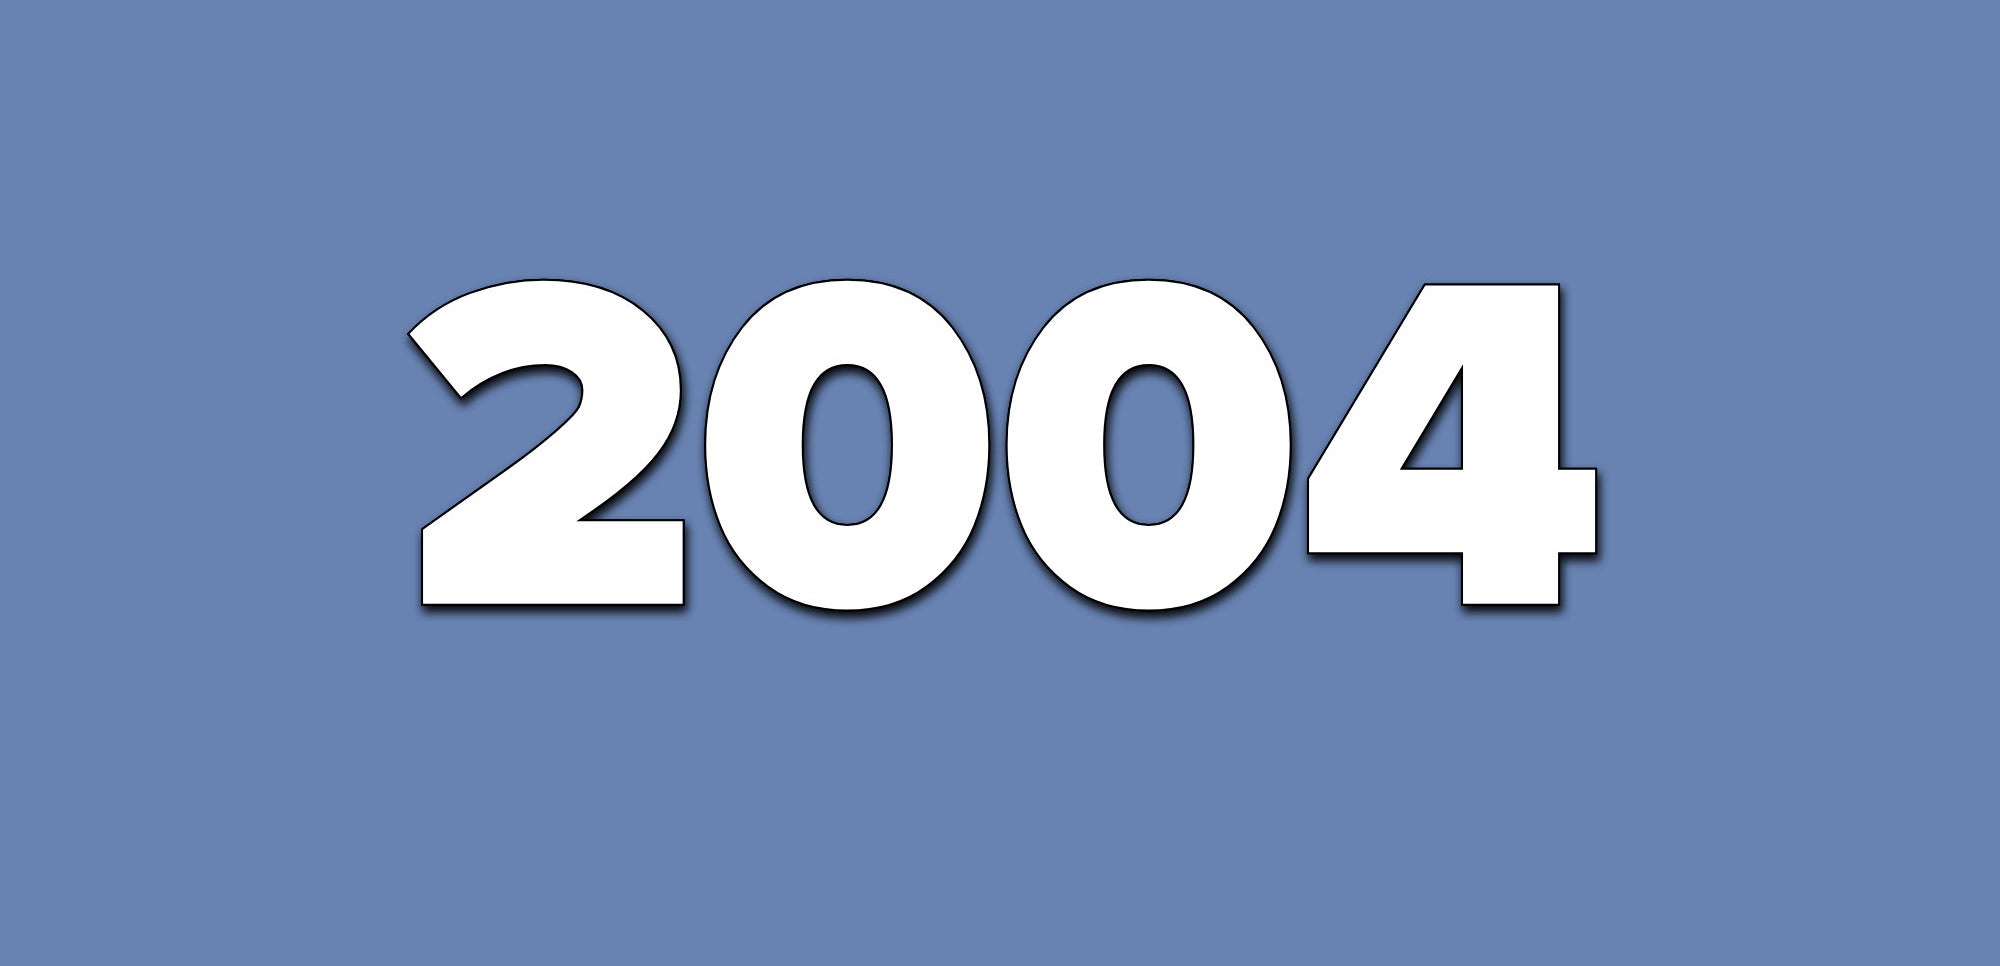 A blue background with text that says 2004